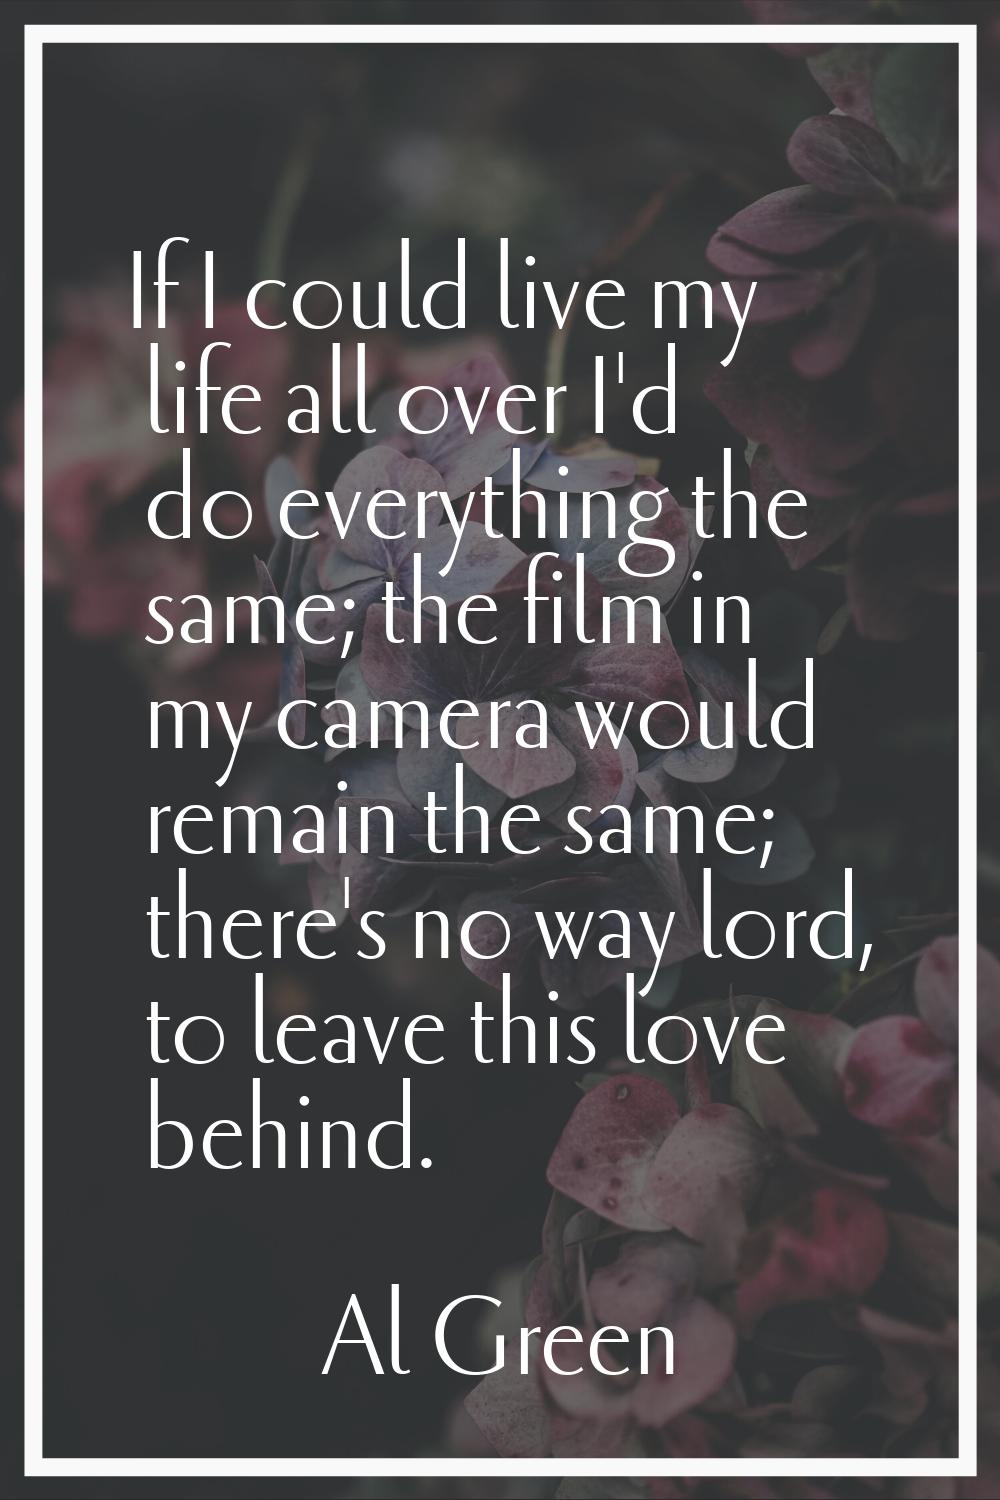 If I could live my life all over I'd do everything the same; the film in my camera would remain the